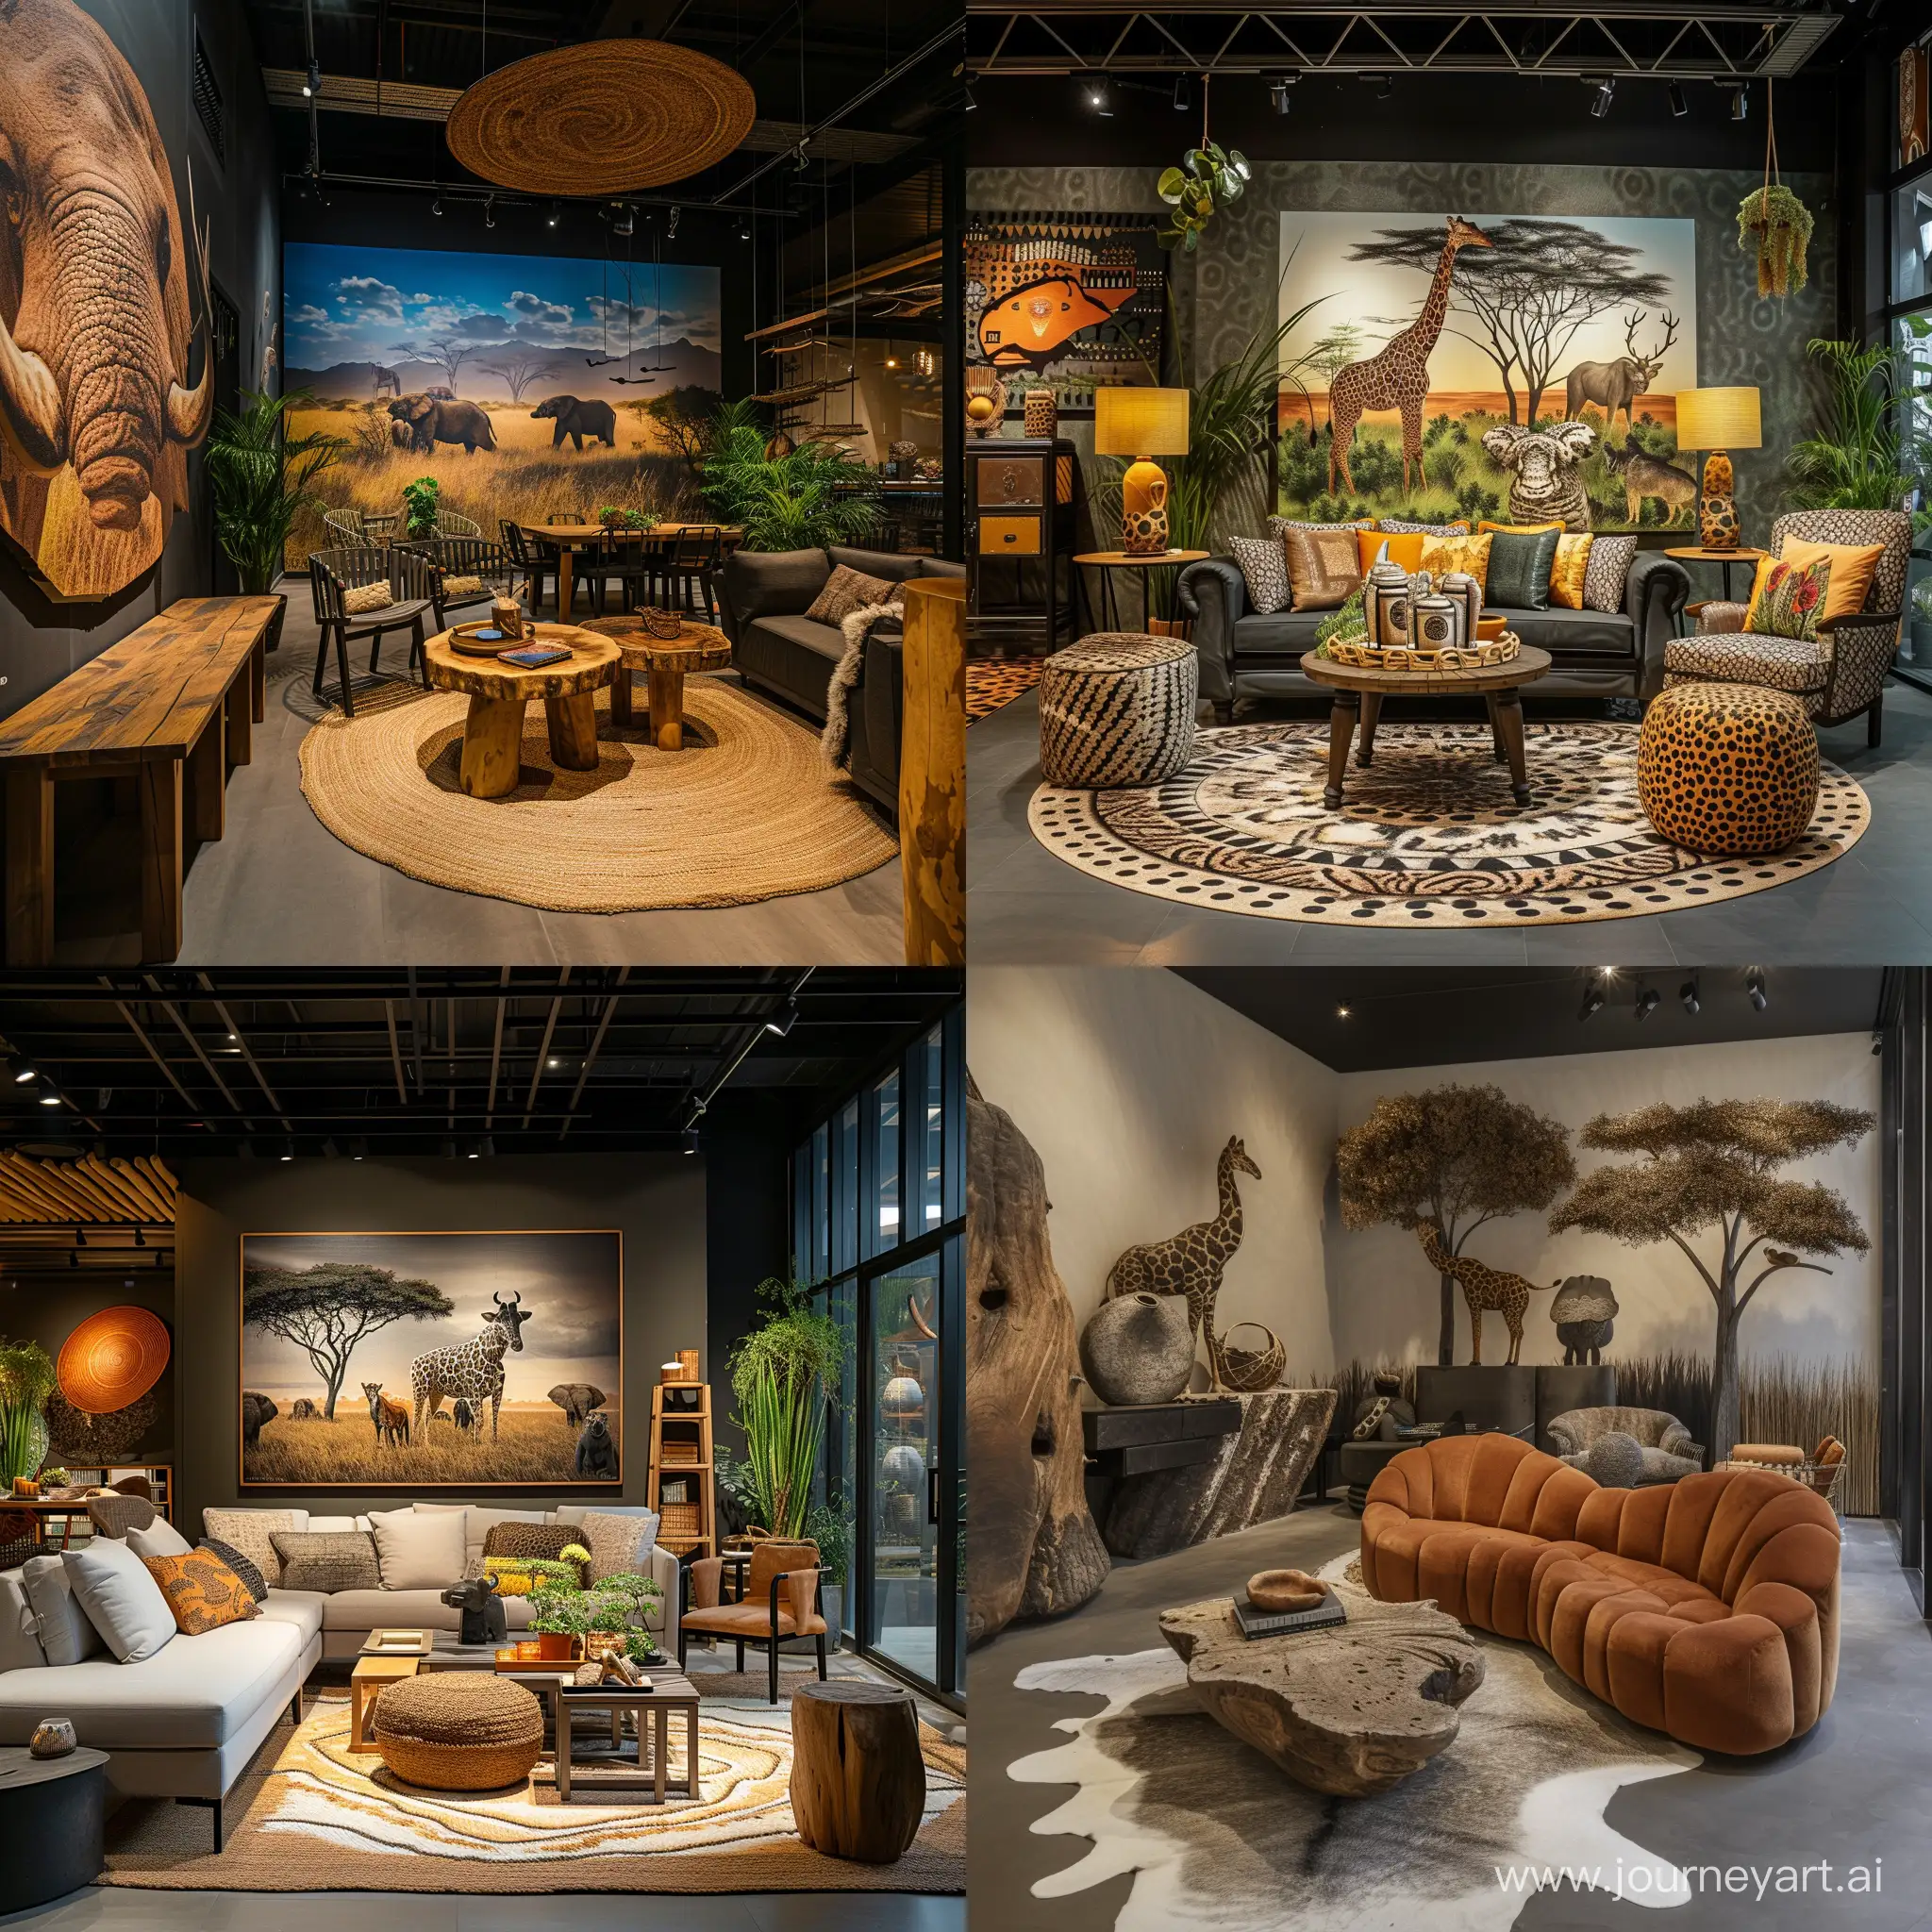 imagine Welcome to the 'Serenity of the Savannah' showroom, an immersive 45 square meter space meticulously designed to showcase the Animal Safari Collection. This showroom brings the essence of the African savannah indoors, accentuated by sustainable design principles and materials.african style interior